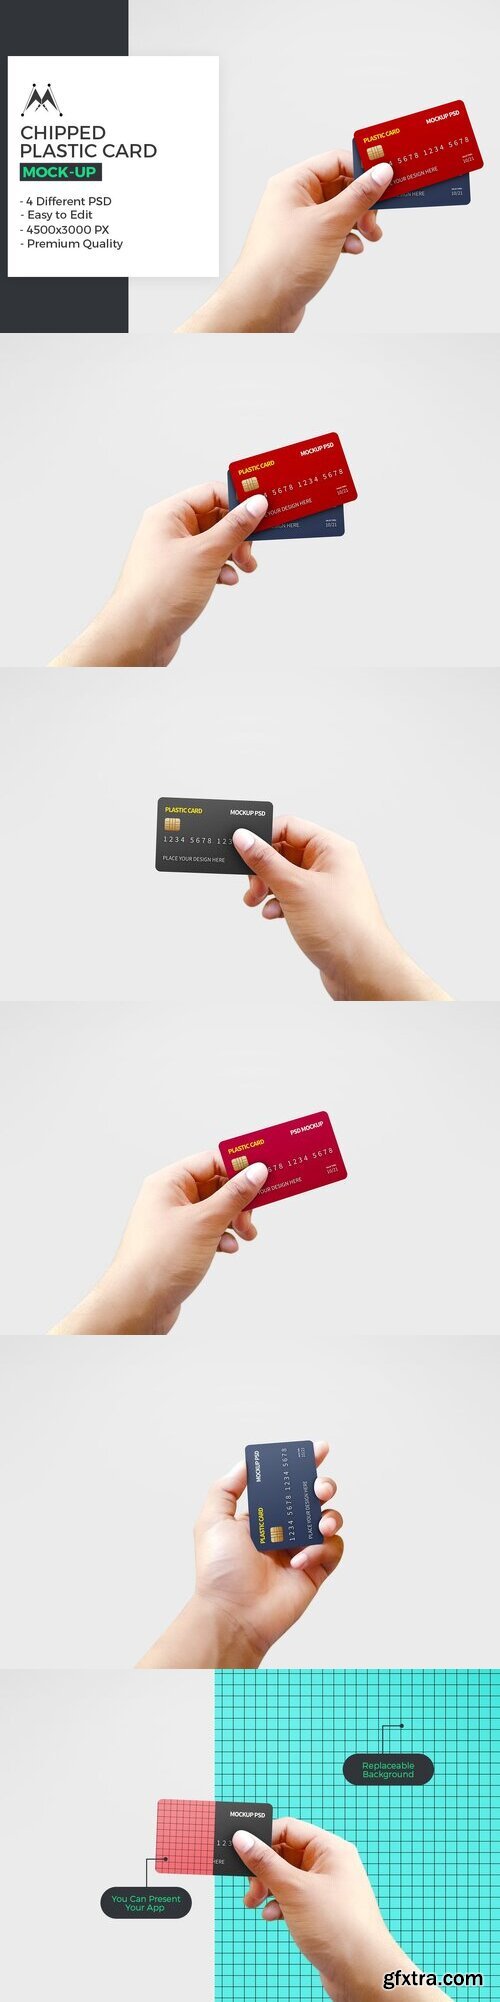 CreativeMarket - Chipped Plastic Card in Hand Mockup 5946311